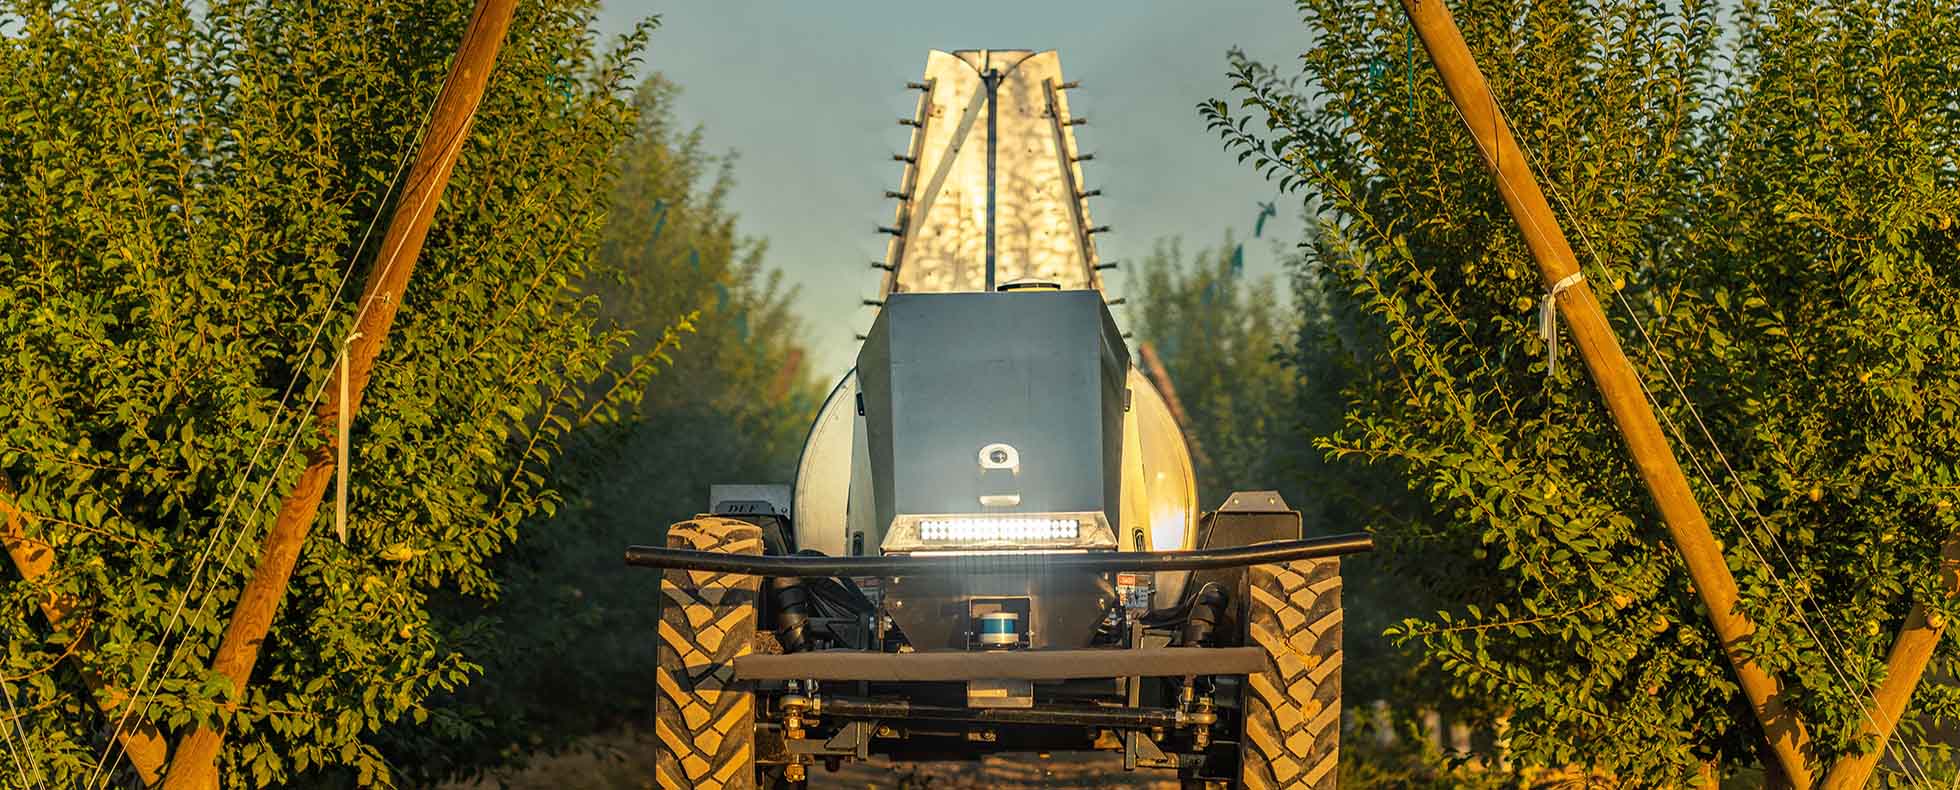 RDO Equipment Co. Precision Agriculture Specialist Team Combine Automation with Smart Apply